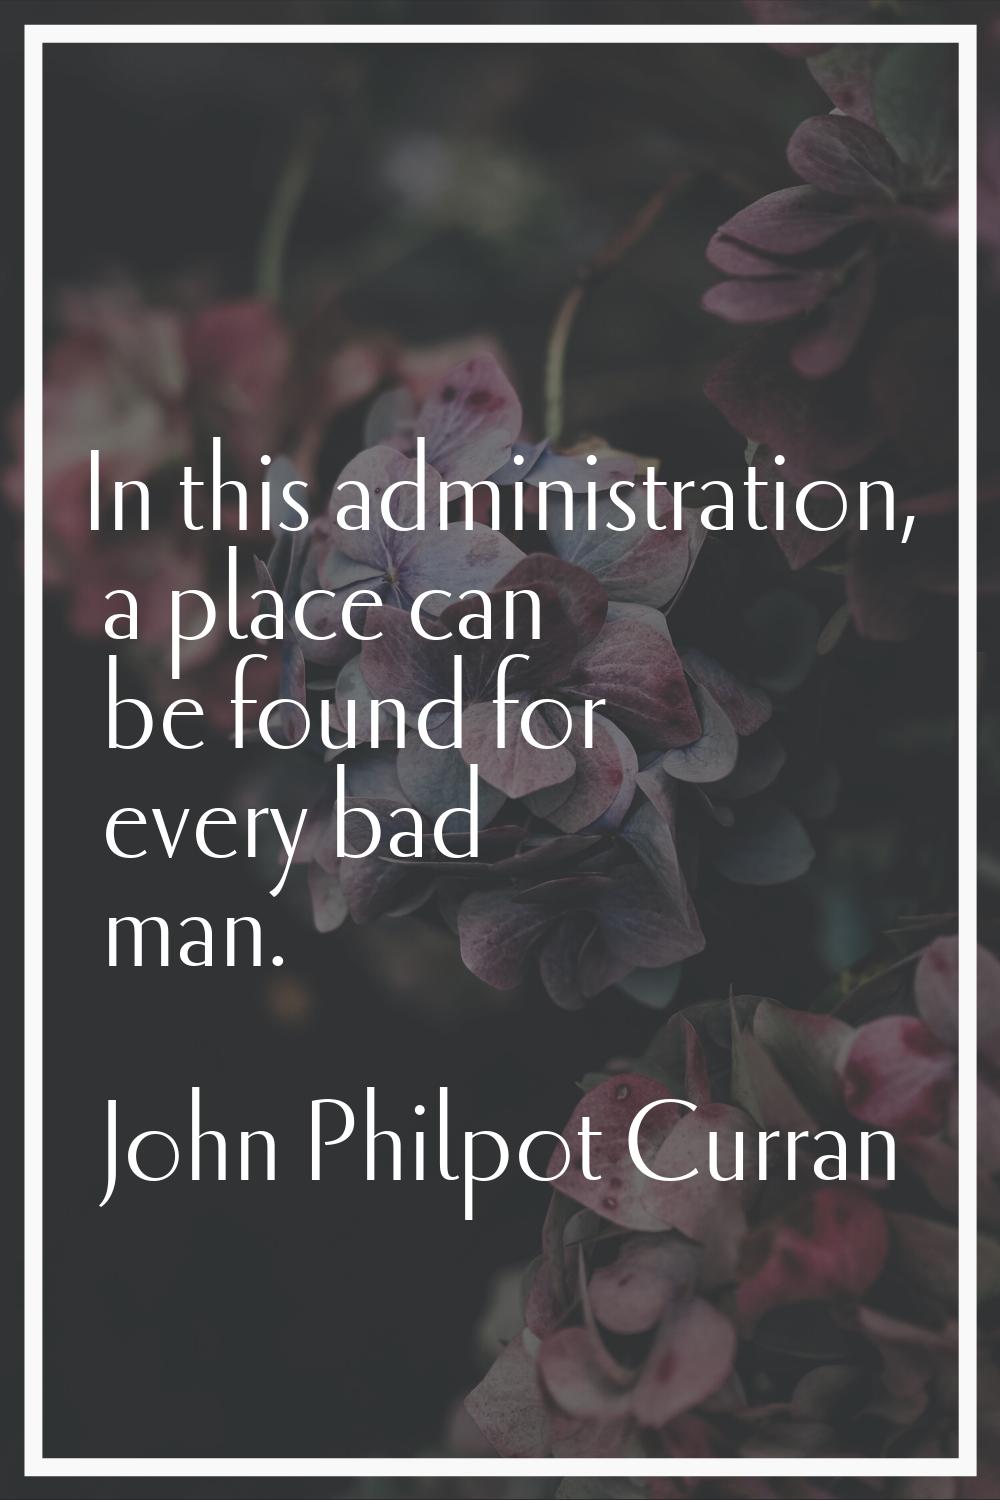 In this administration, a place can be found for every bad man.